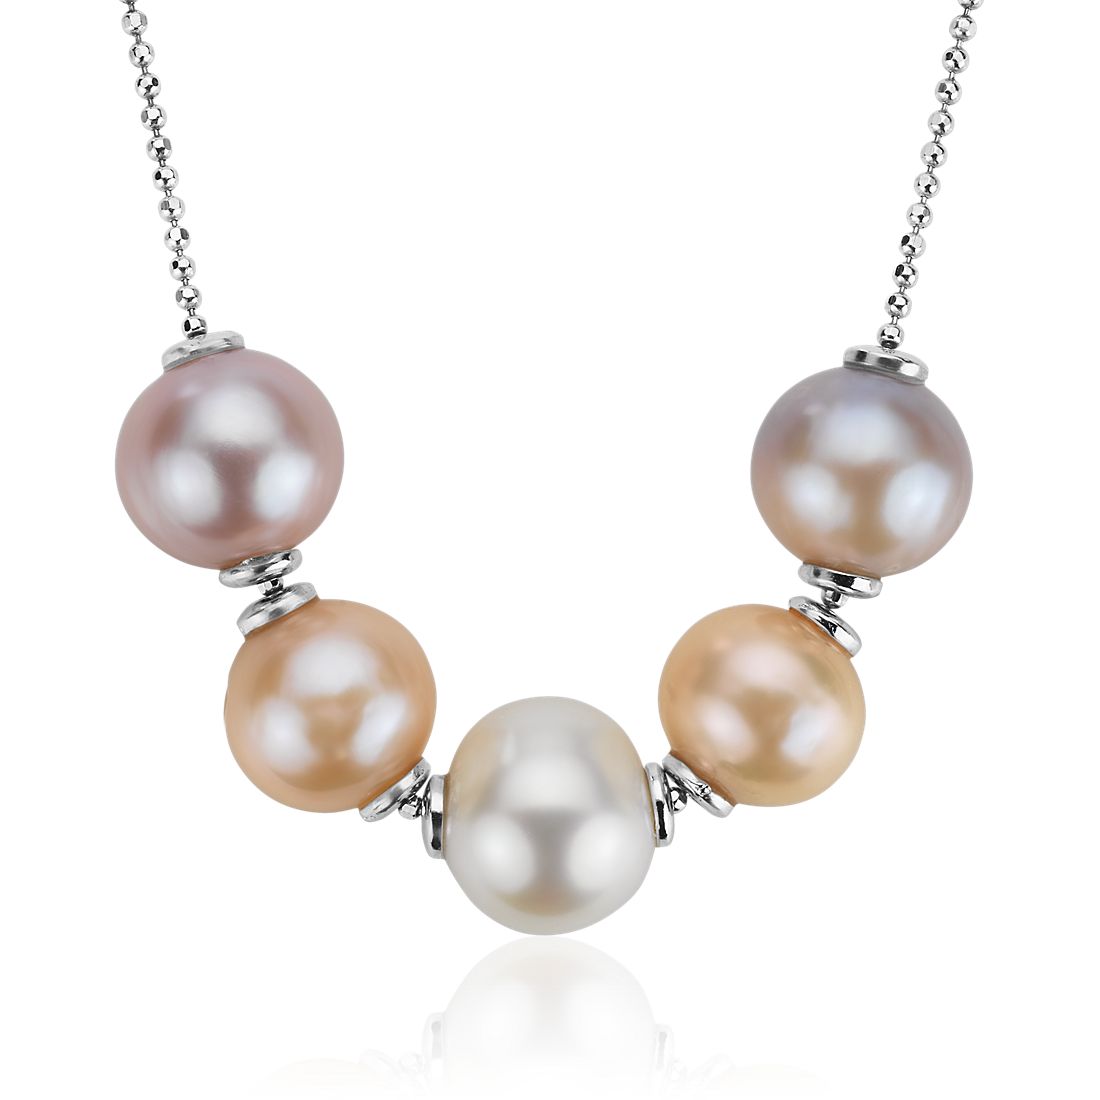 Movable Freshwater Cultured Pearl Necklace in Sterling Silver (9-10mm)